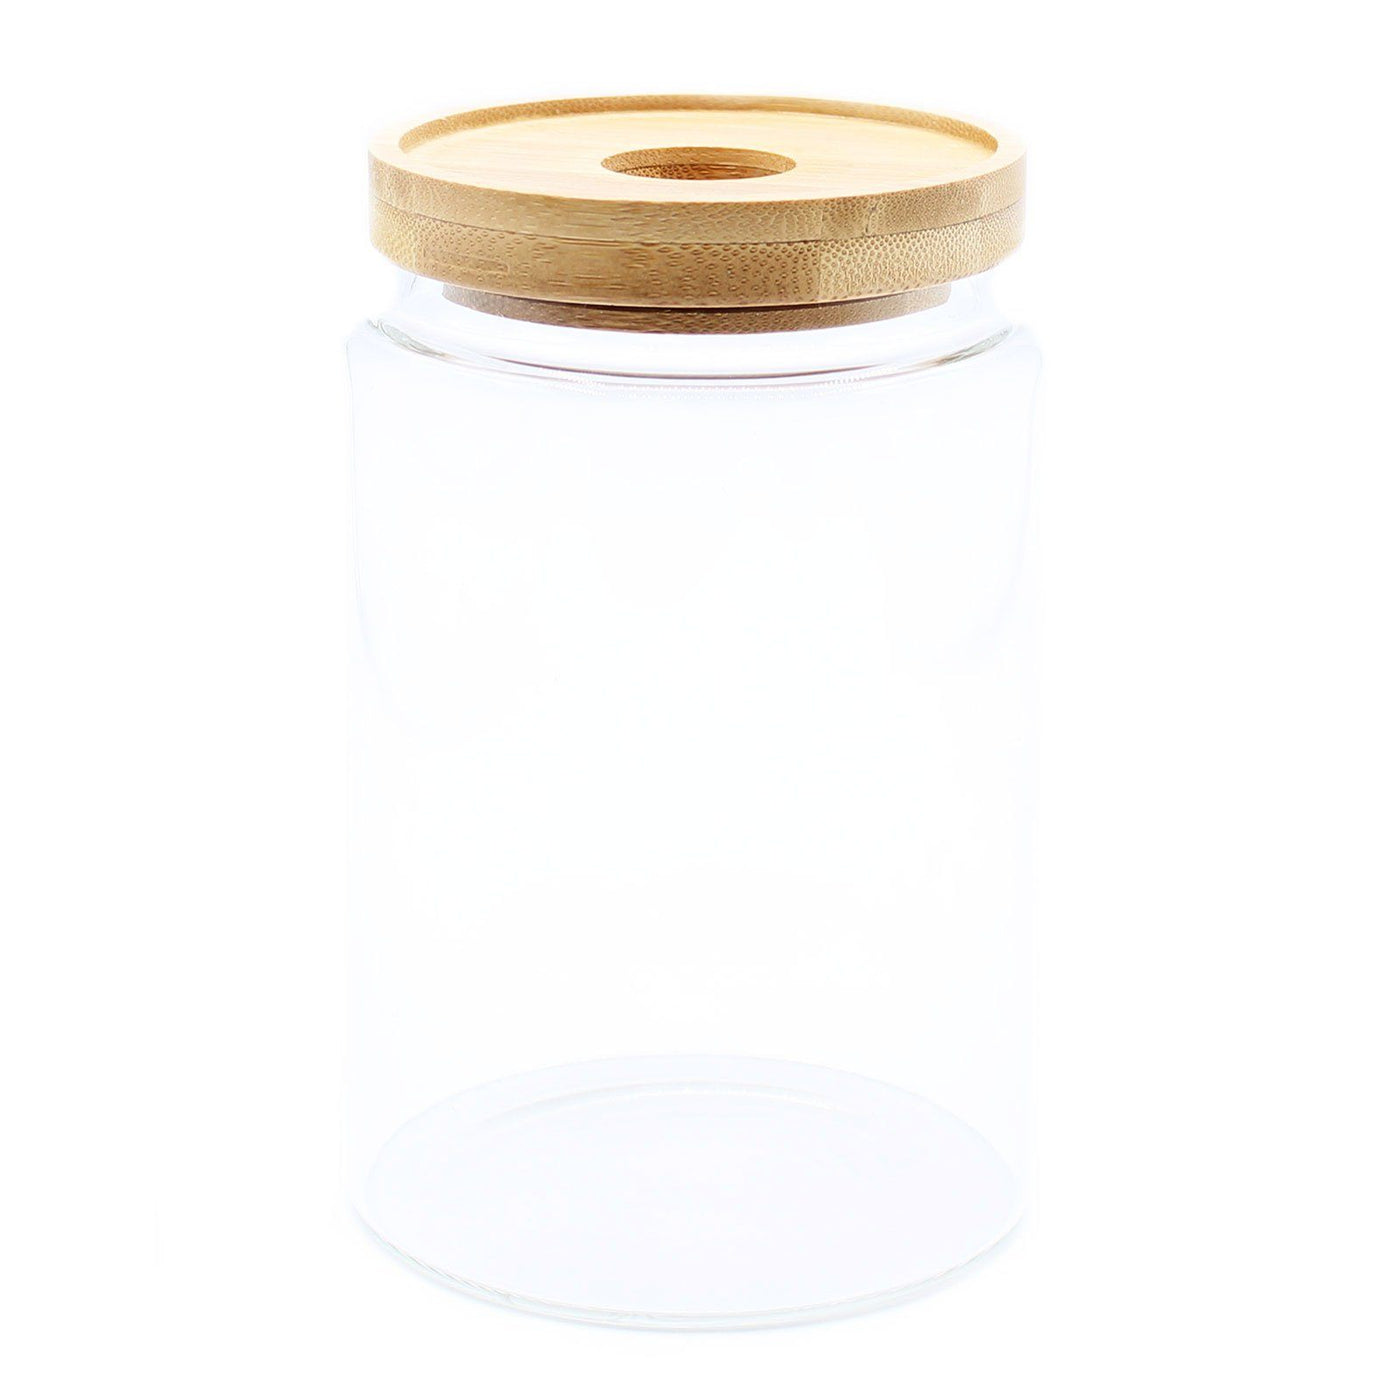 Cottage Bamboo Storage Glass Jars With Lid 10-25cm.